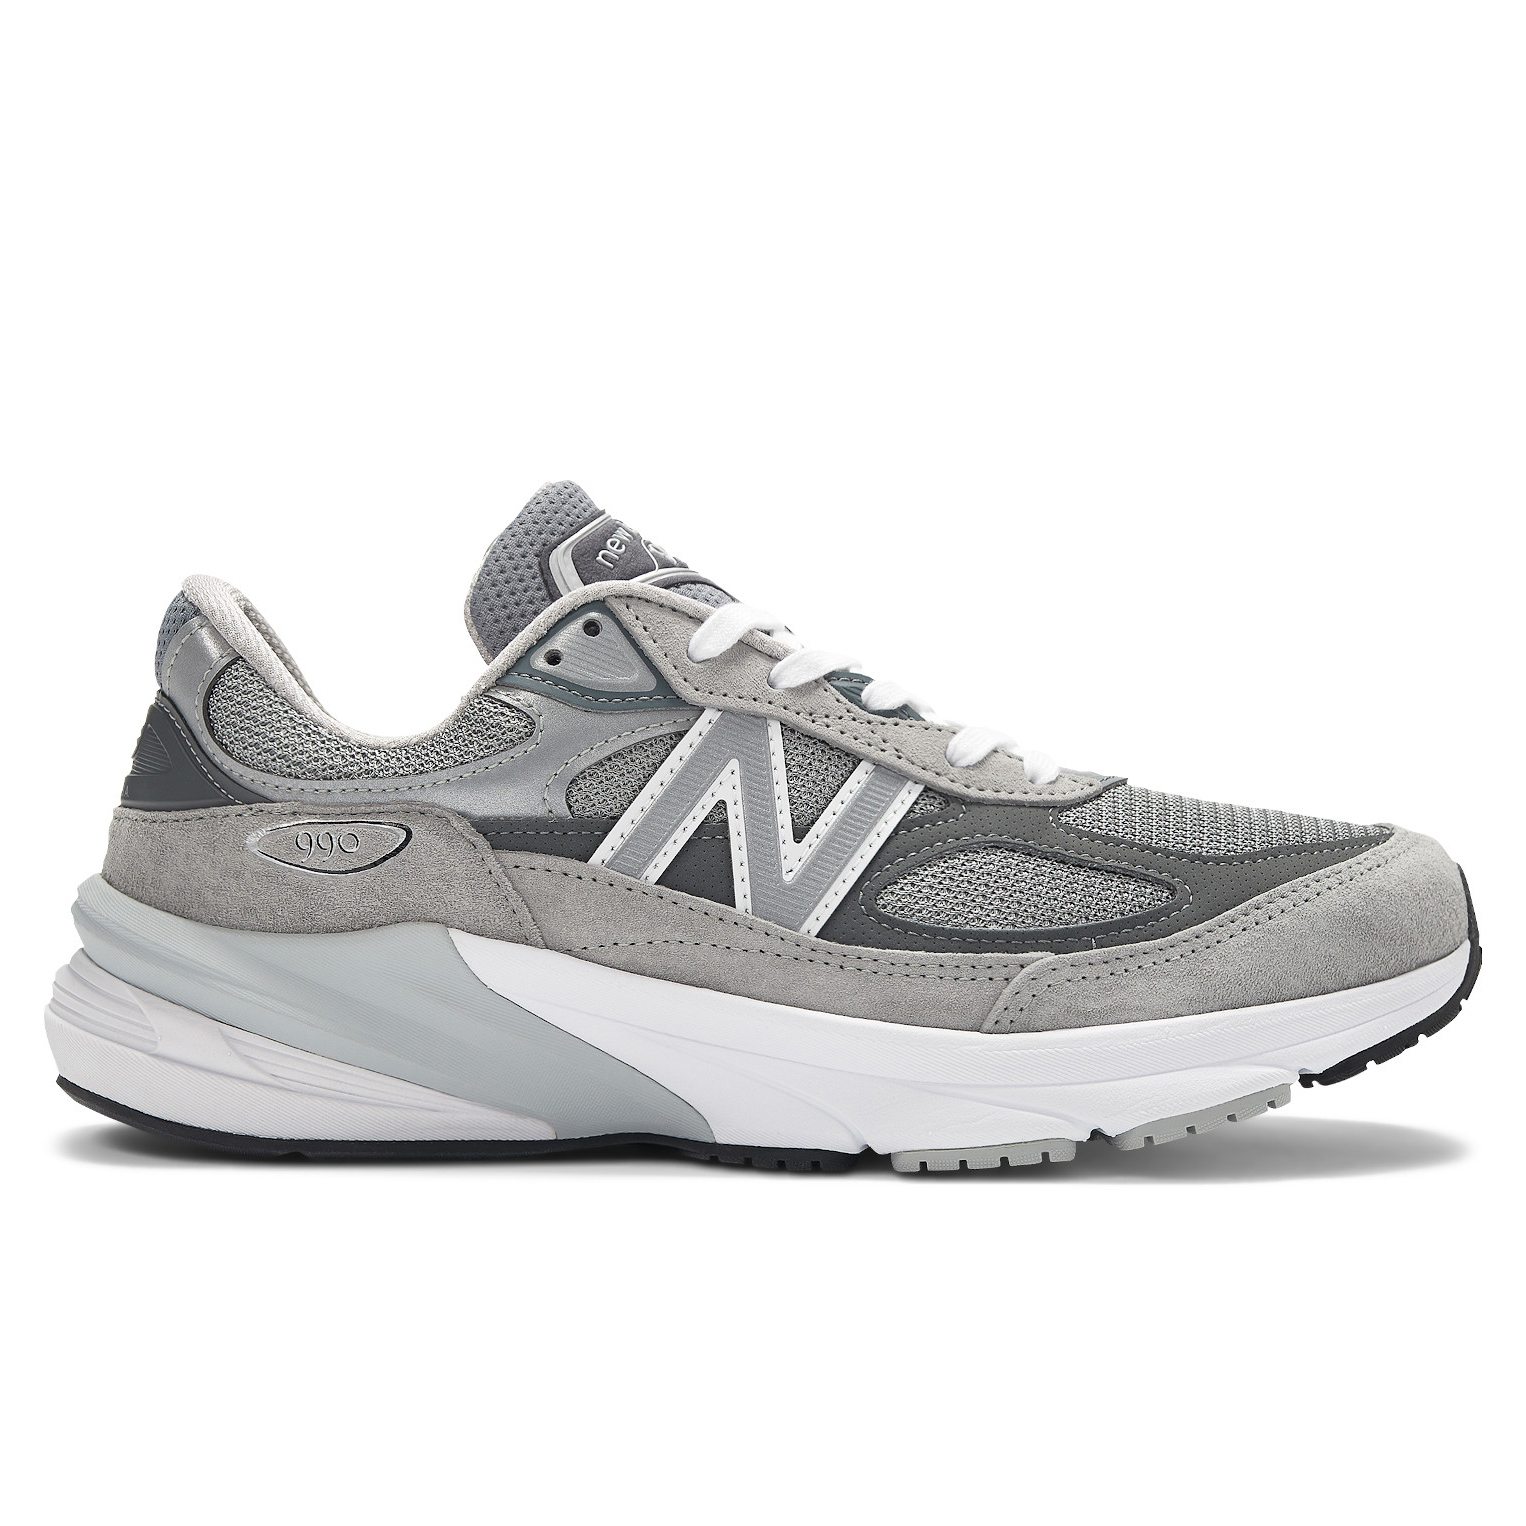 New Balance Made in USA 990v6 Sneaker - Grey | Casual Sneakers ...